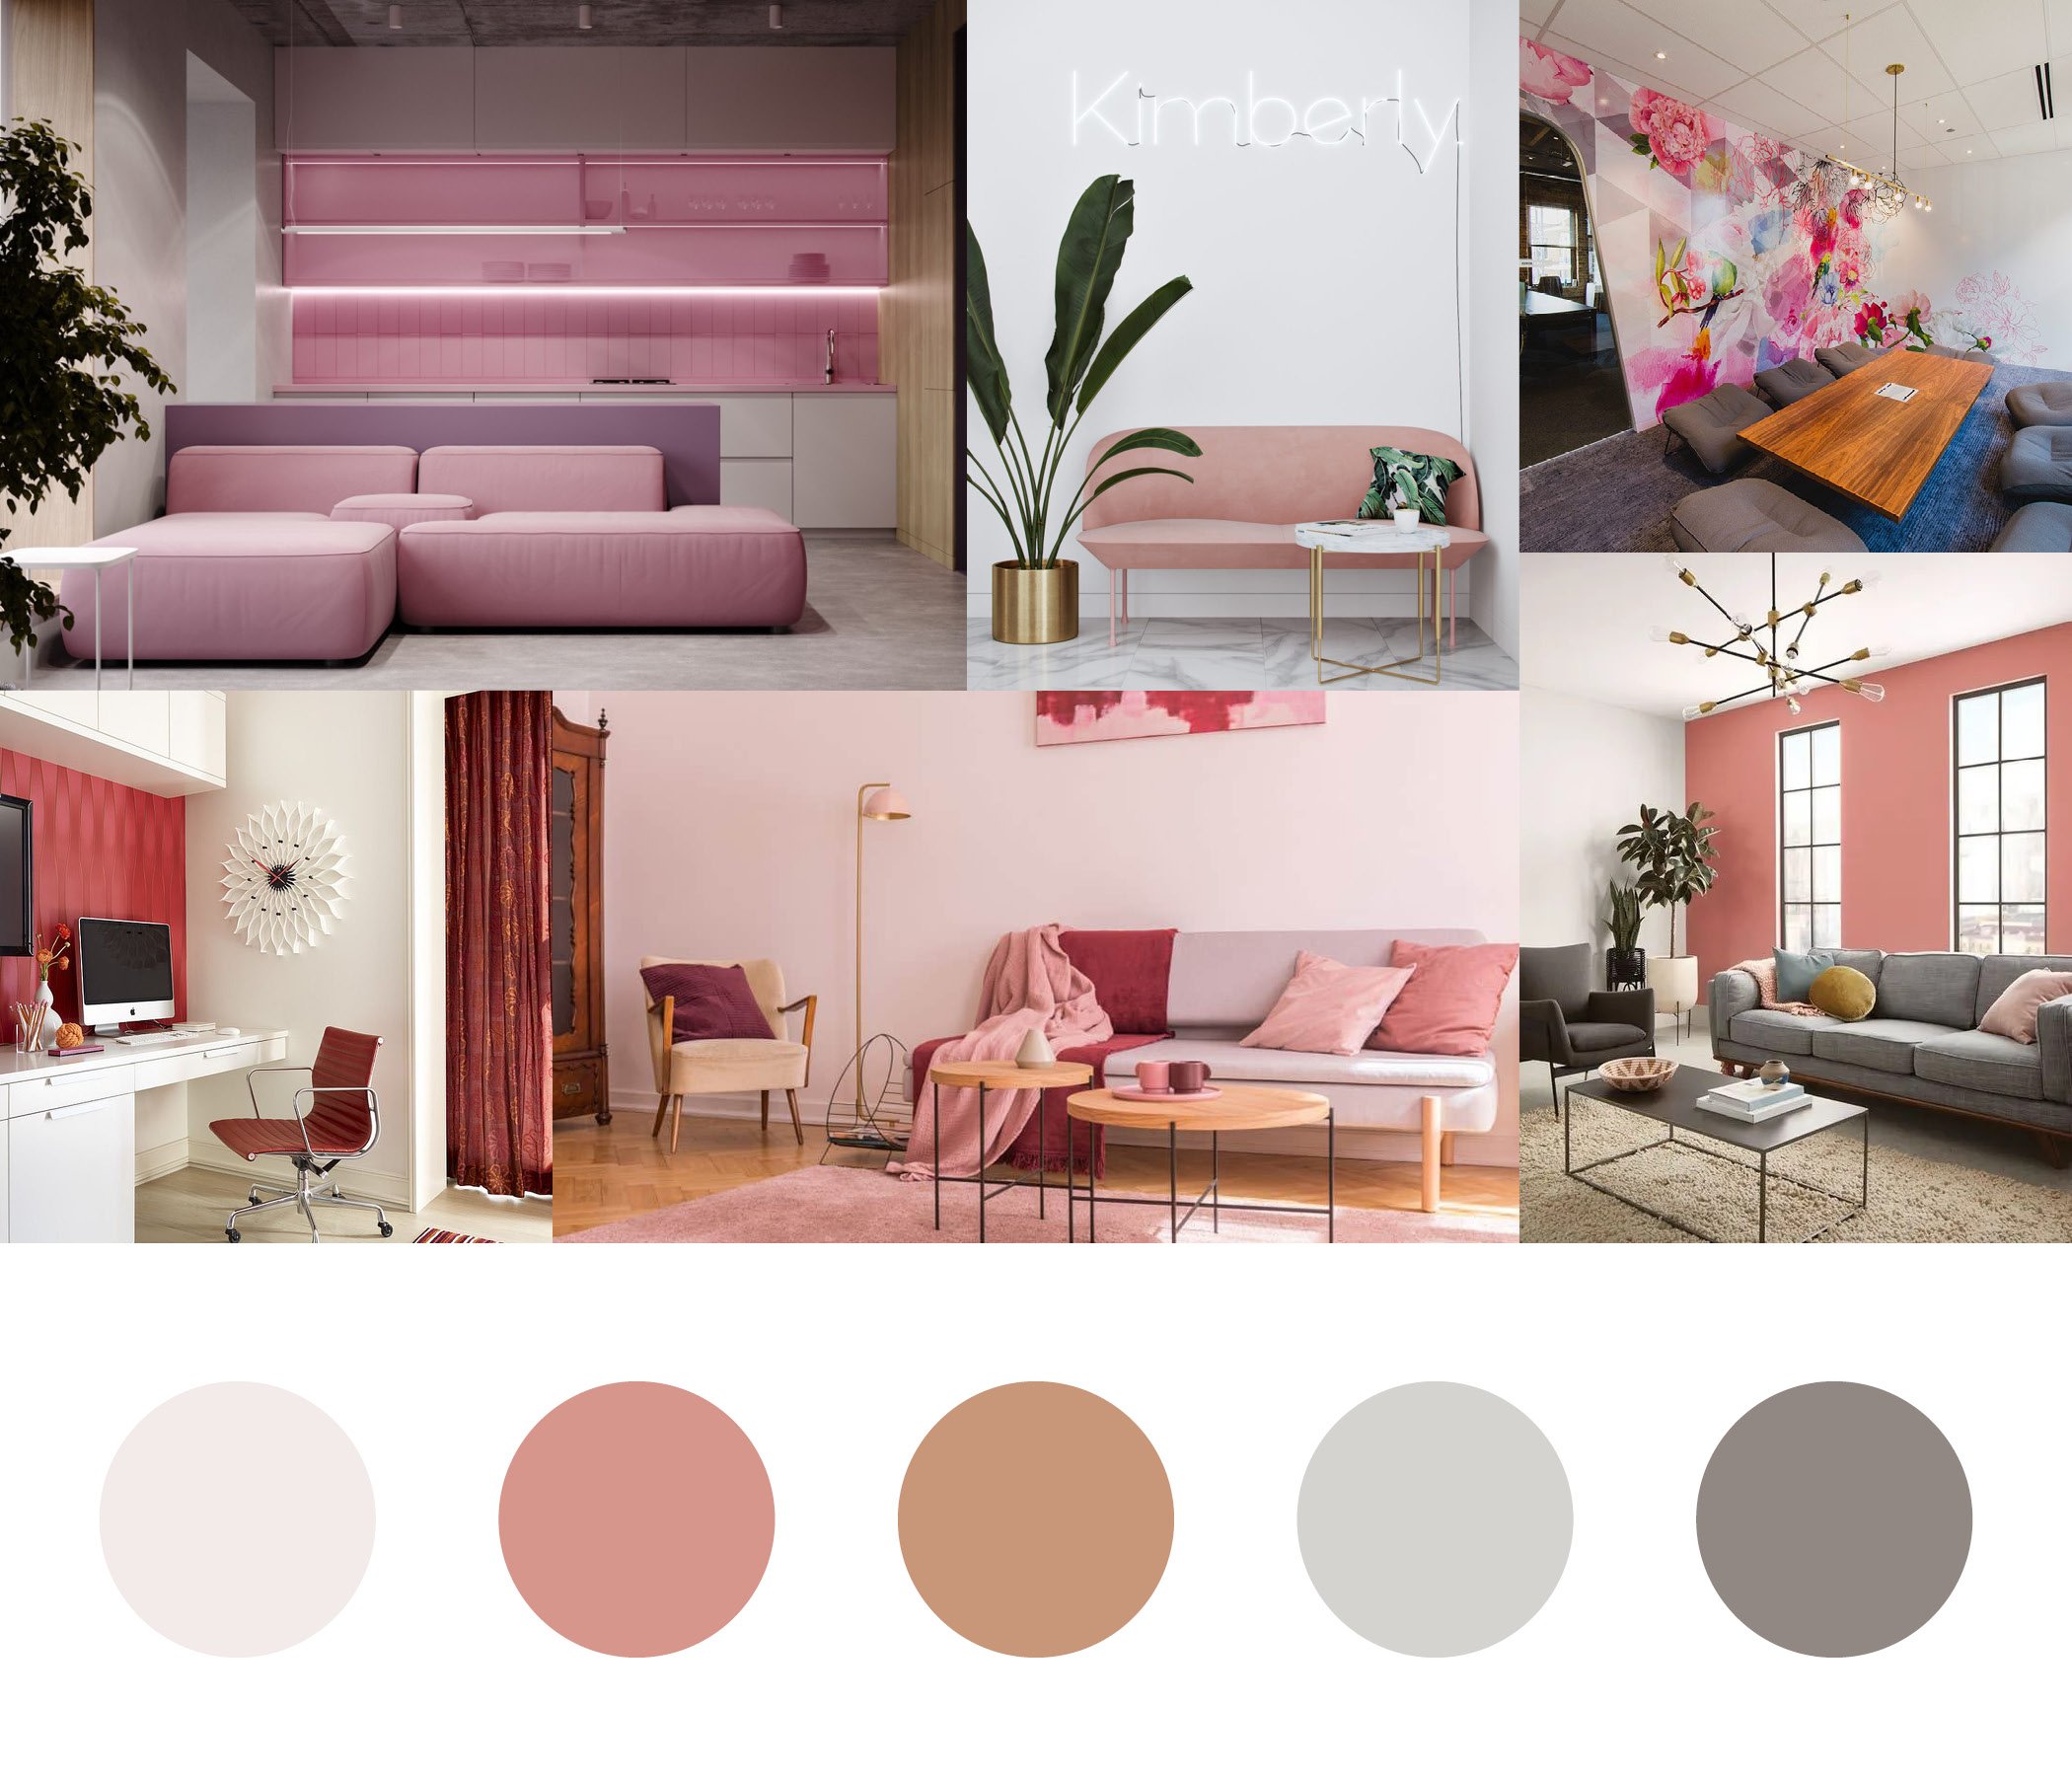 25 Refined Pink And Black Bedroom Decor Ideas - DigsDigs